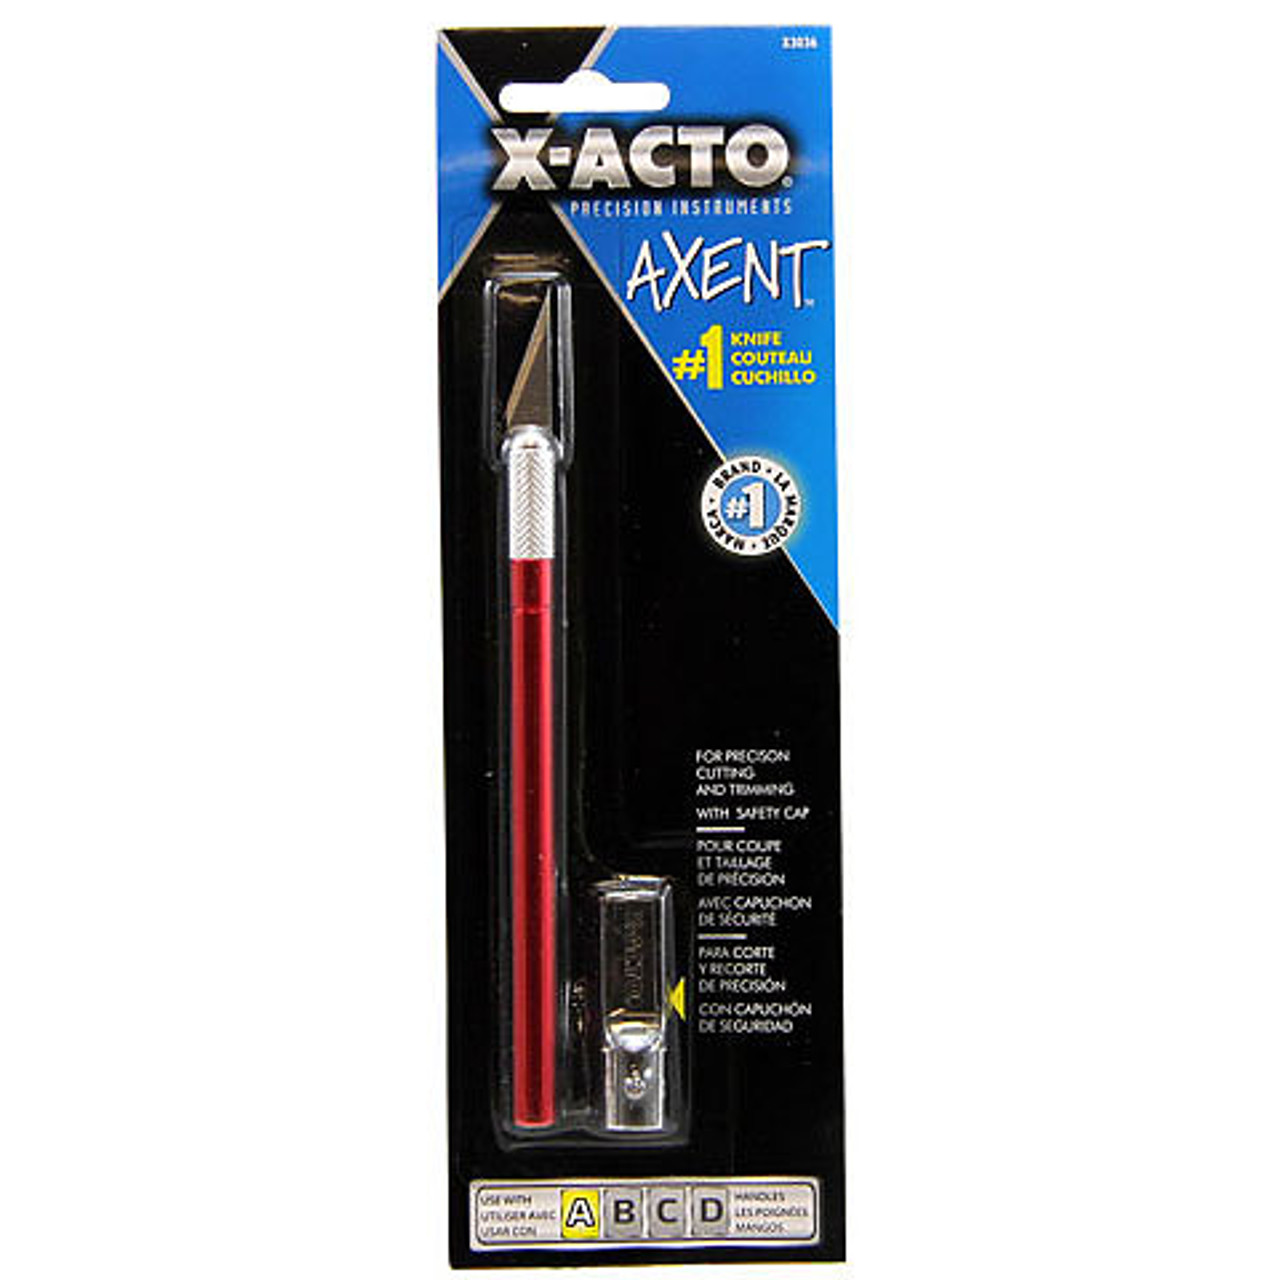 X-ACTO AXENT #1 Knife